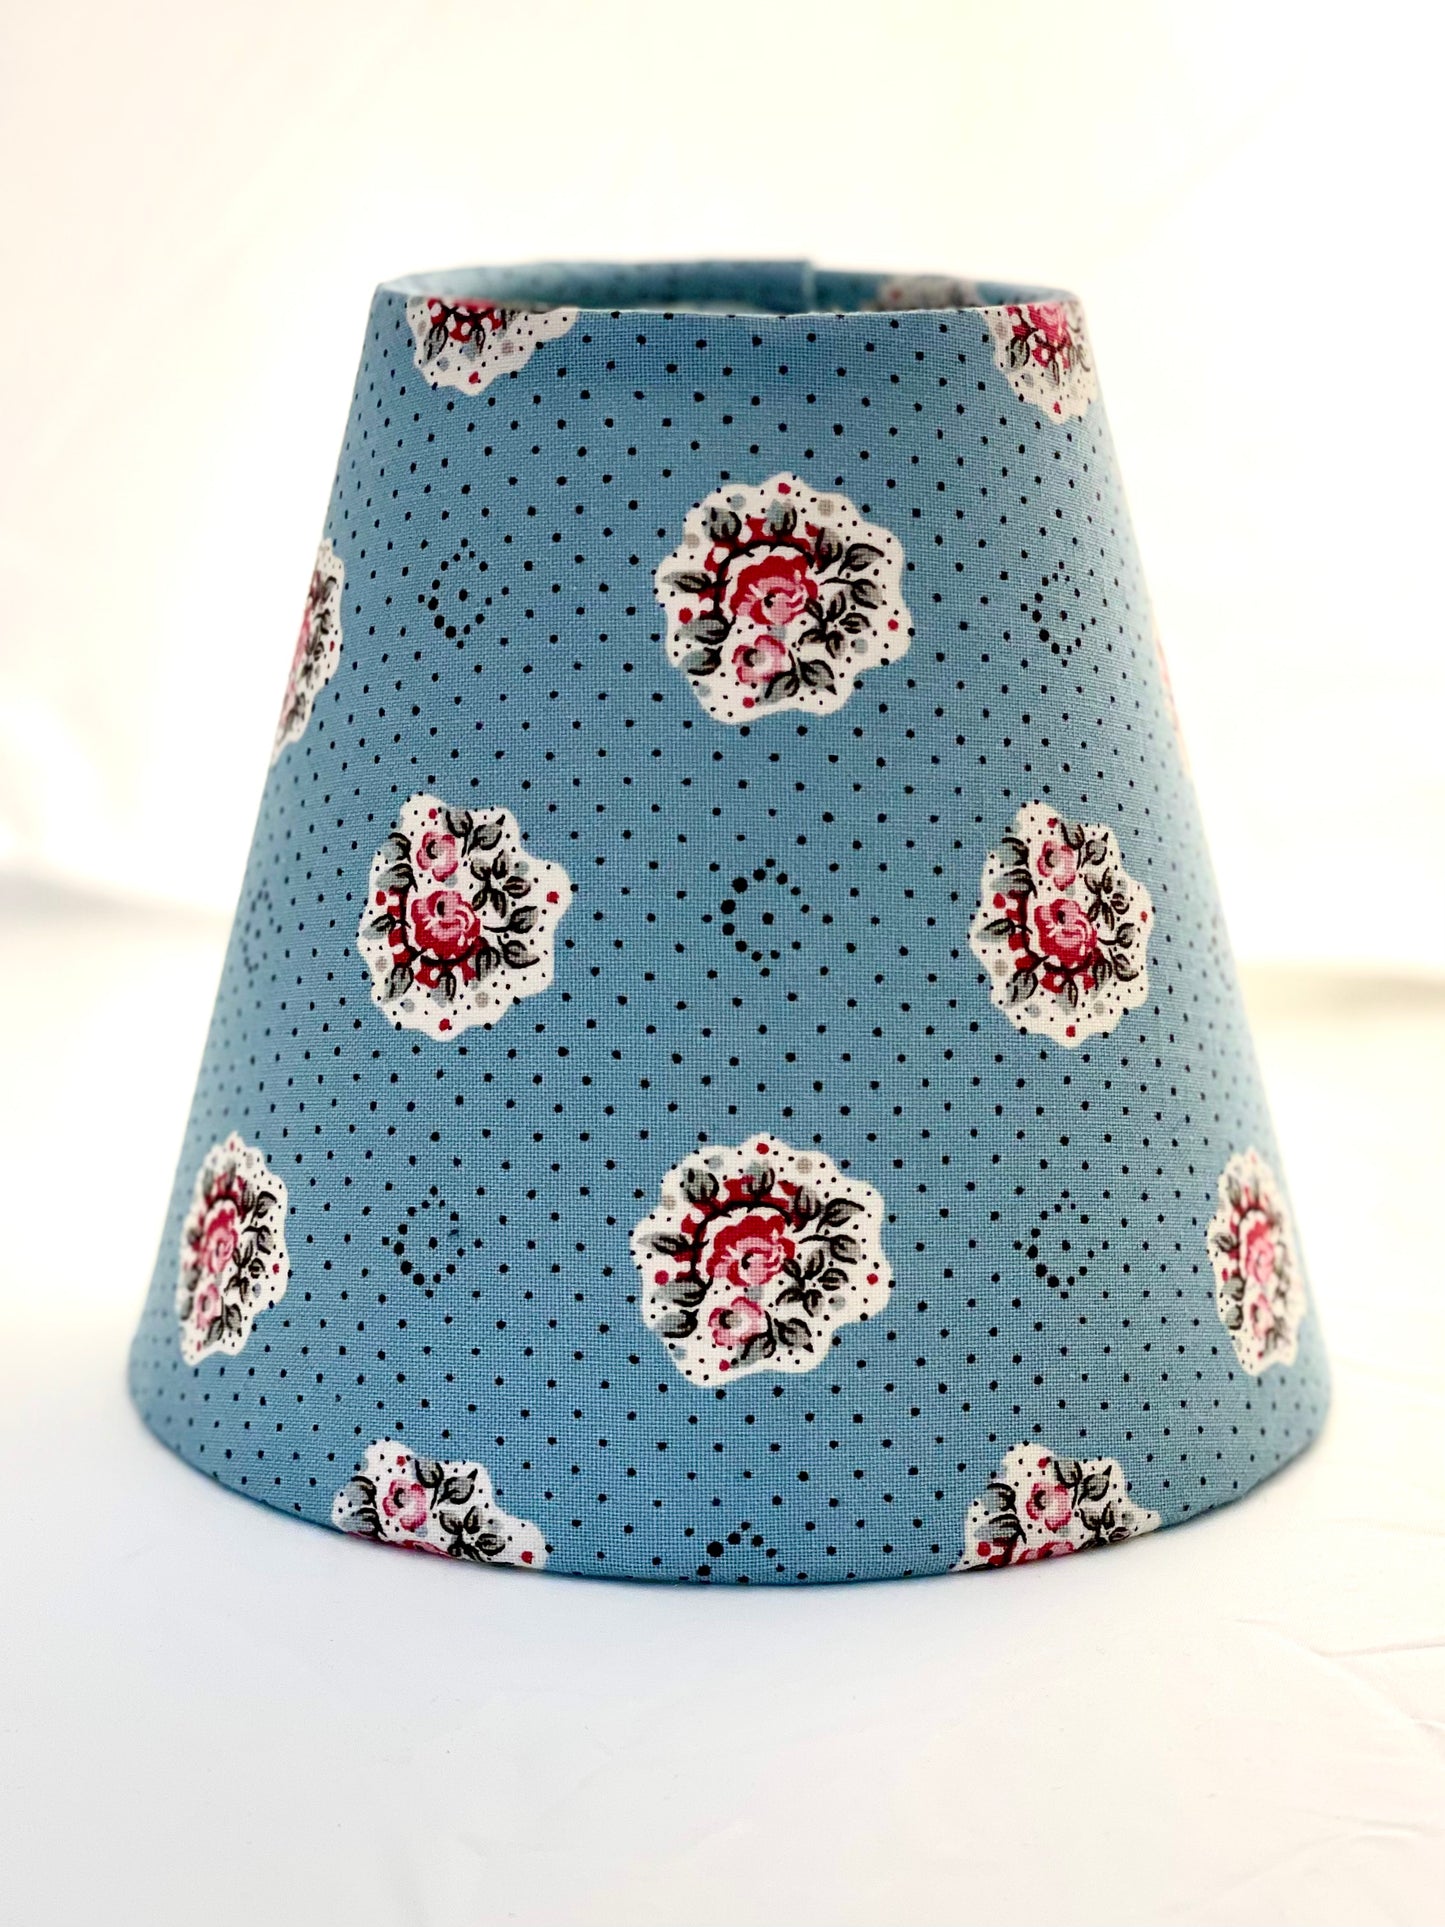 Small Clip-On Lampshade. Les Olivades "Maïanenco". French Blue with Pink Floral Bouquets.